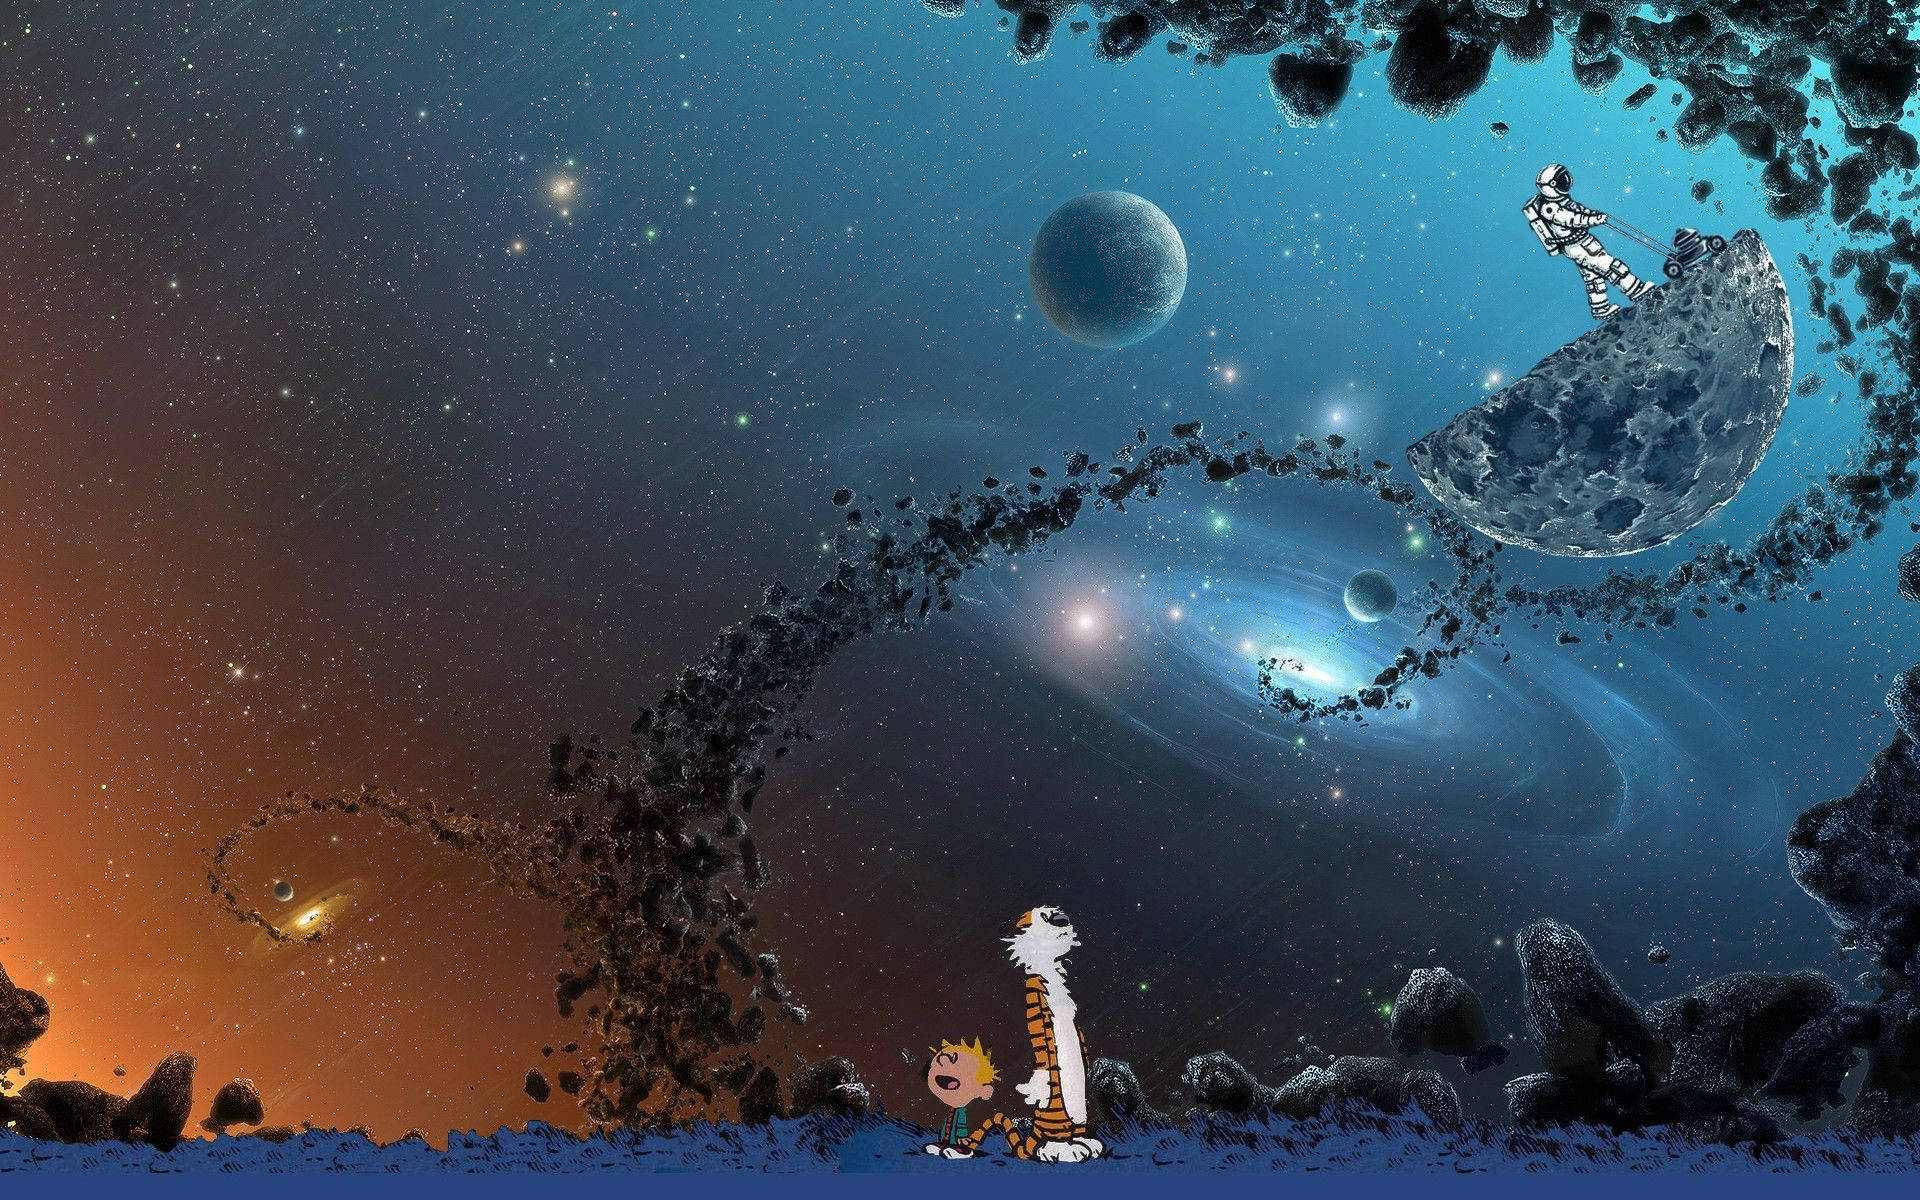 “Calvin and Hobbes Journey to Outer Space” Wallpaper